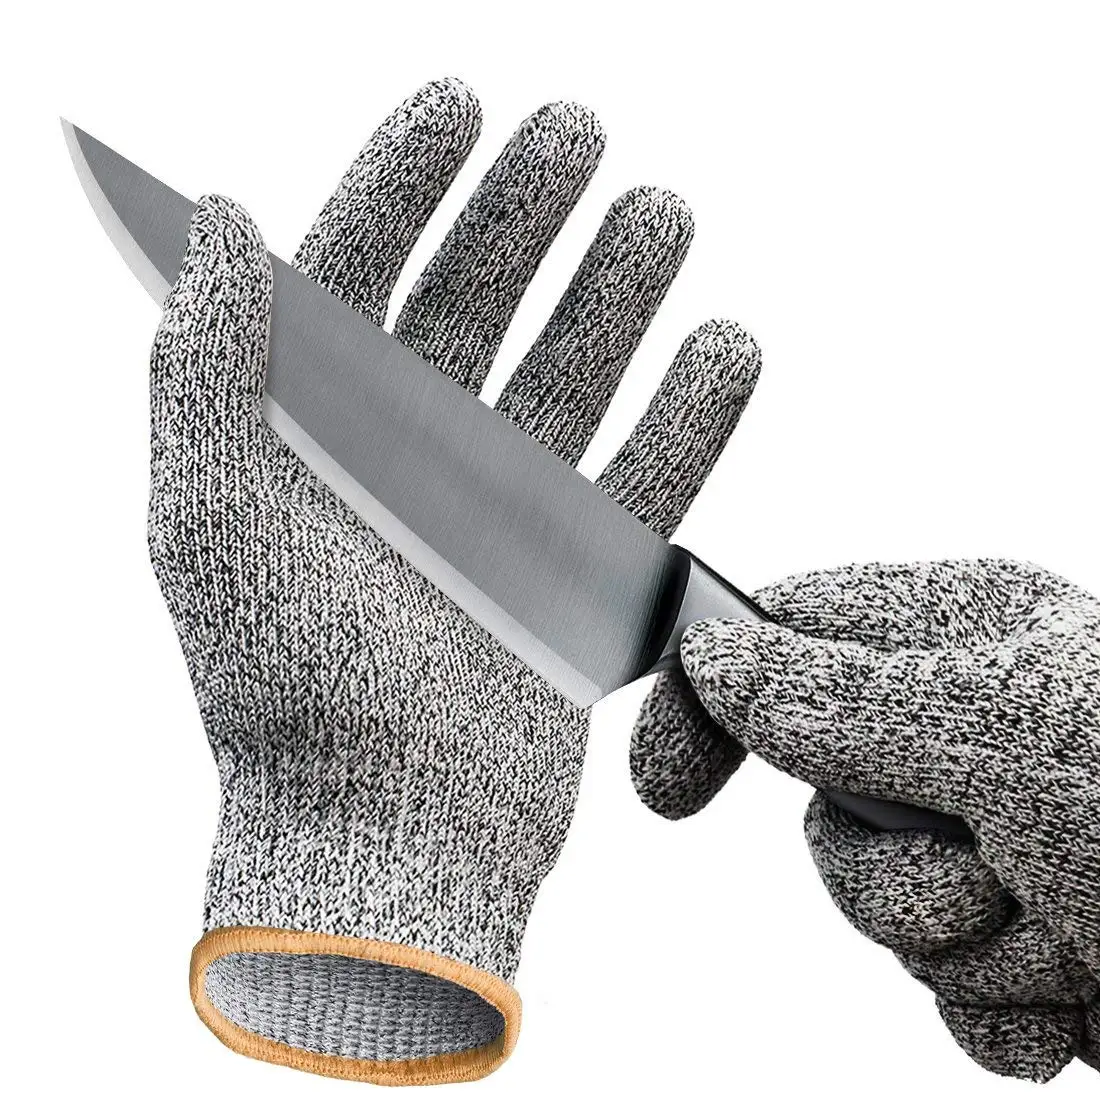 Cheap Meat Cutting Gloves, find Meat Cutting Gloves deals on line at